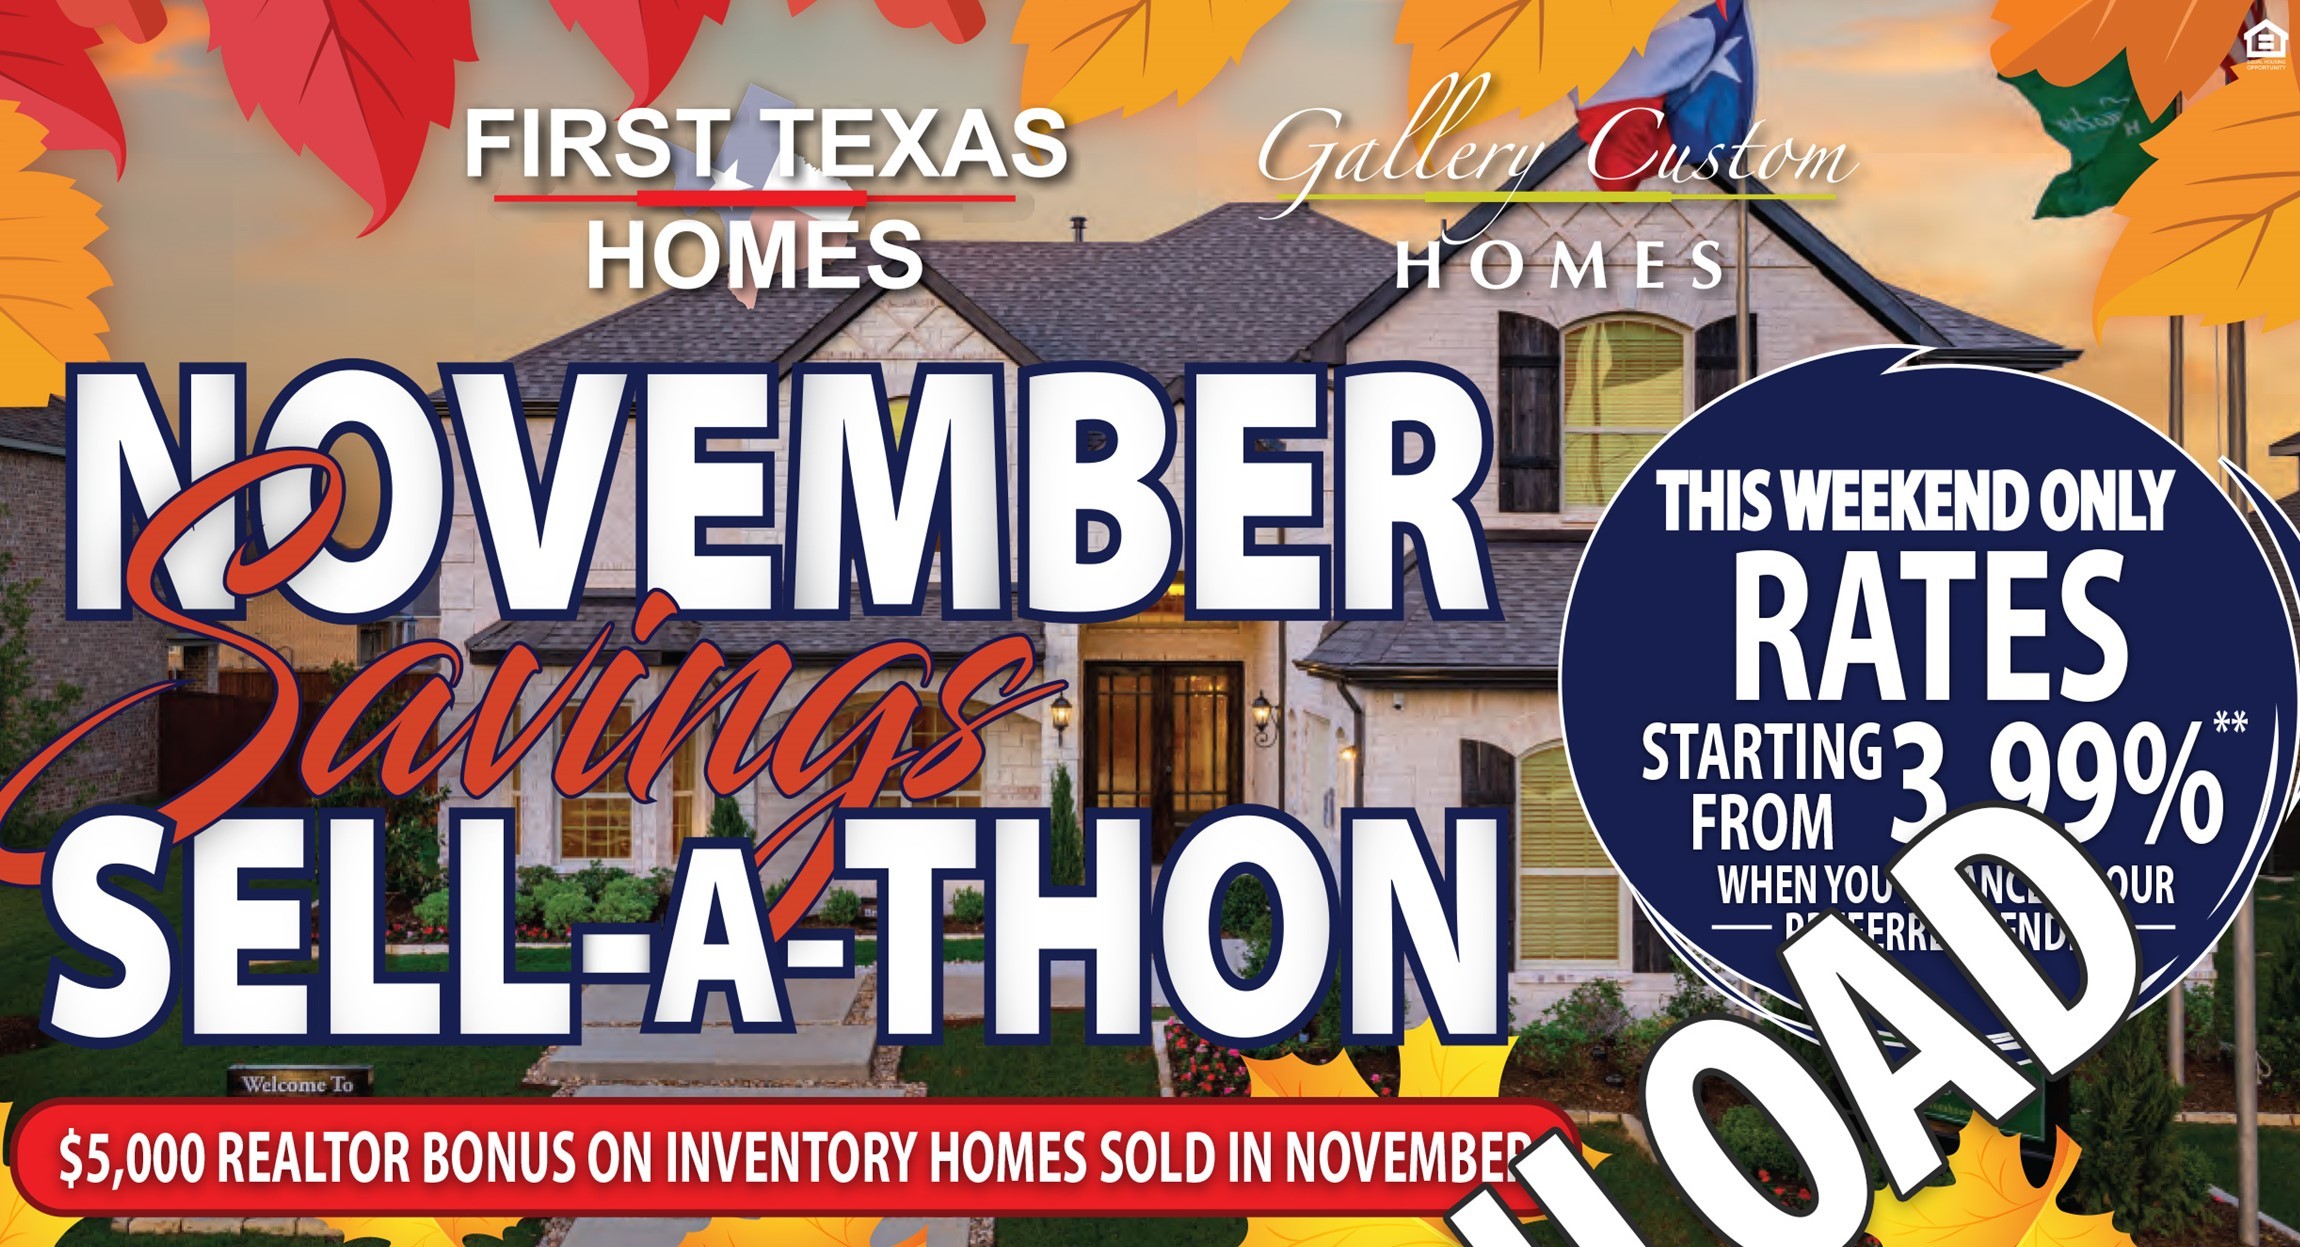 First Texas Home Builder Discounts & Incentives in Dallas Fort Worth, TX